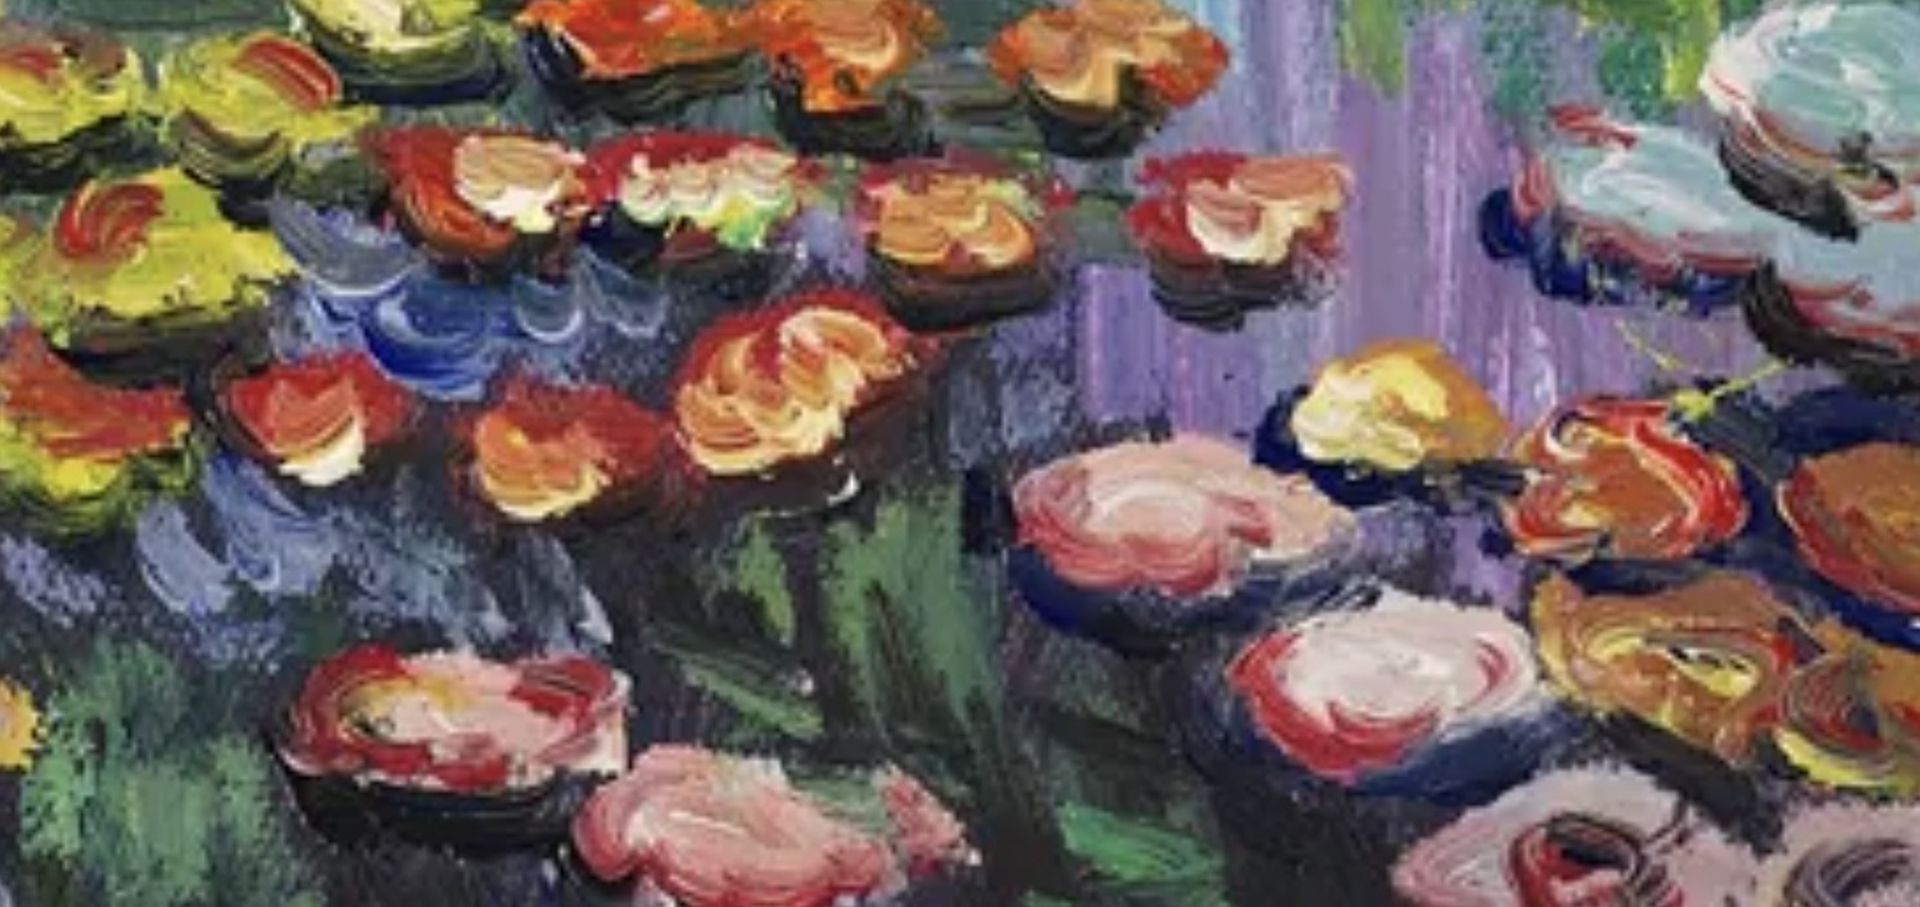 Claude Monet "Water Lilies" Oil Painting, After - Image 6 of 6